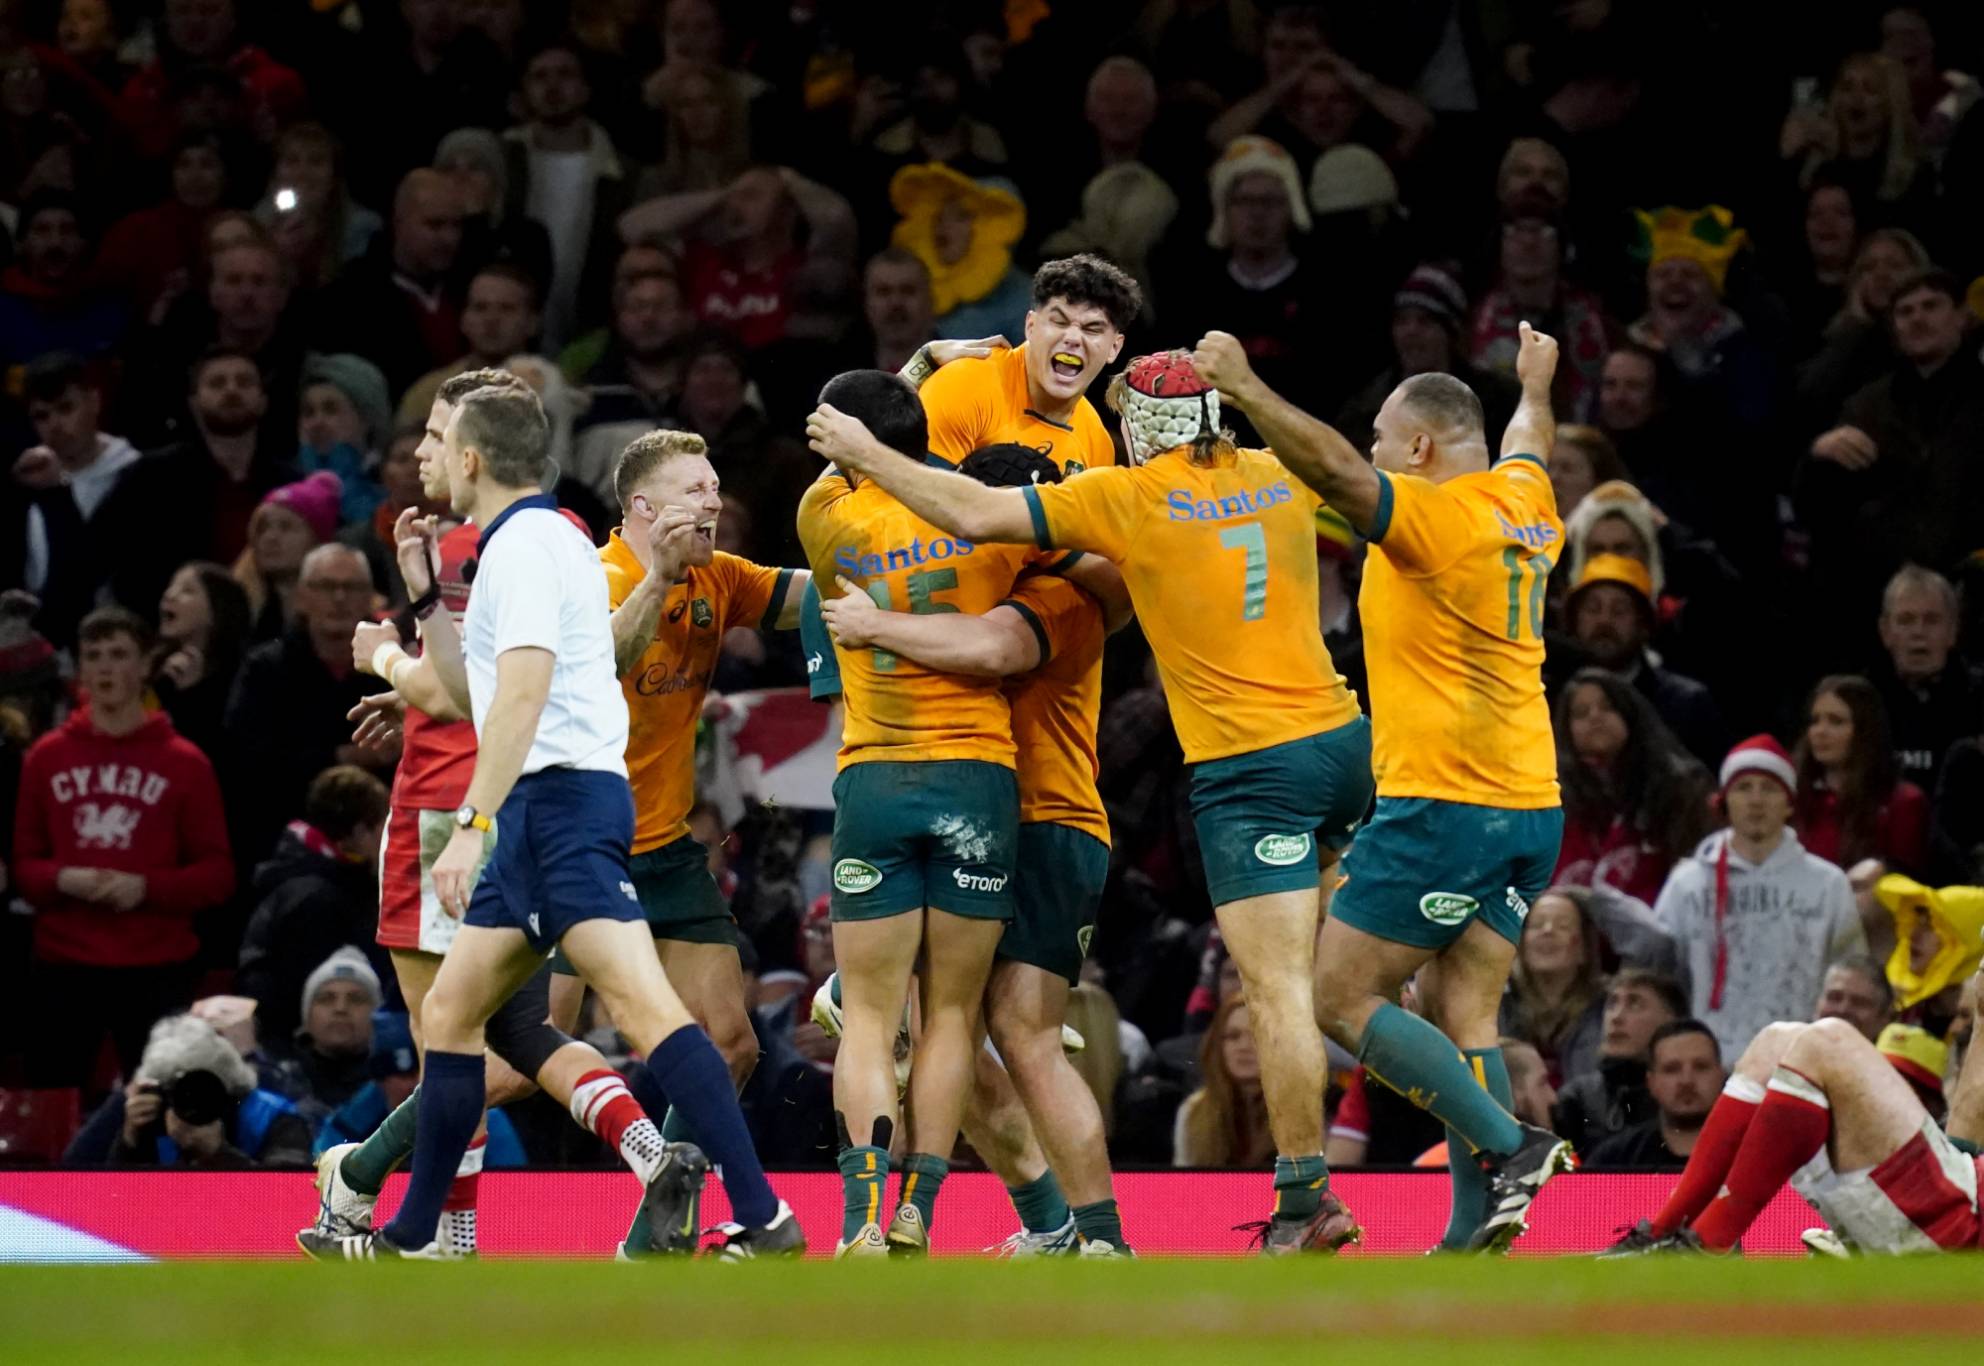 Wallabies Australia players celebrate at the final whistle after the Autumn International match at Principality Stadium, Cardiff. Picture date: Saturday November 26, 2022. (Photo by David Davies/PA Images via Getty Images)